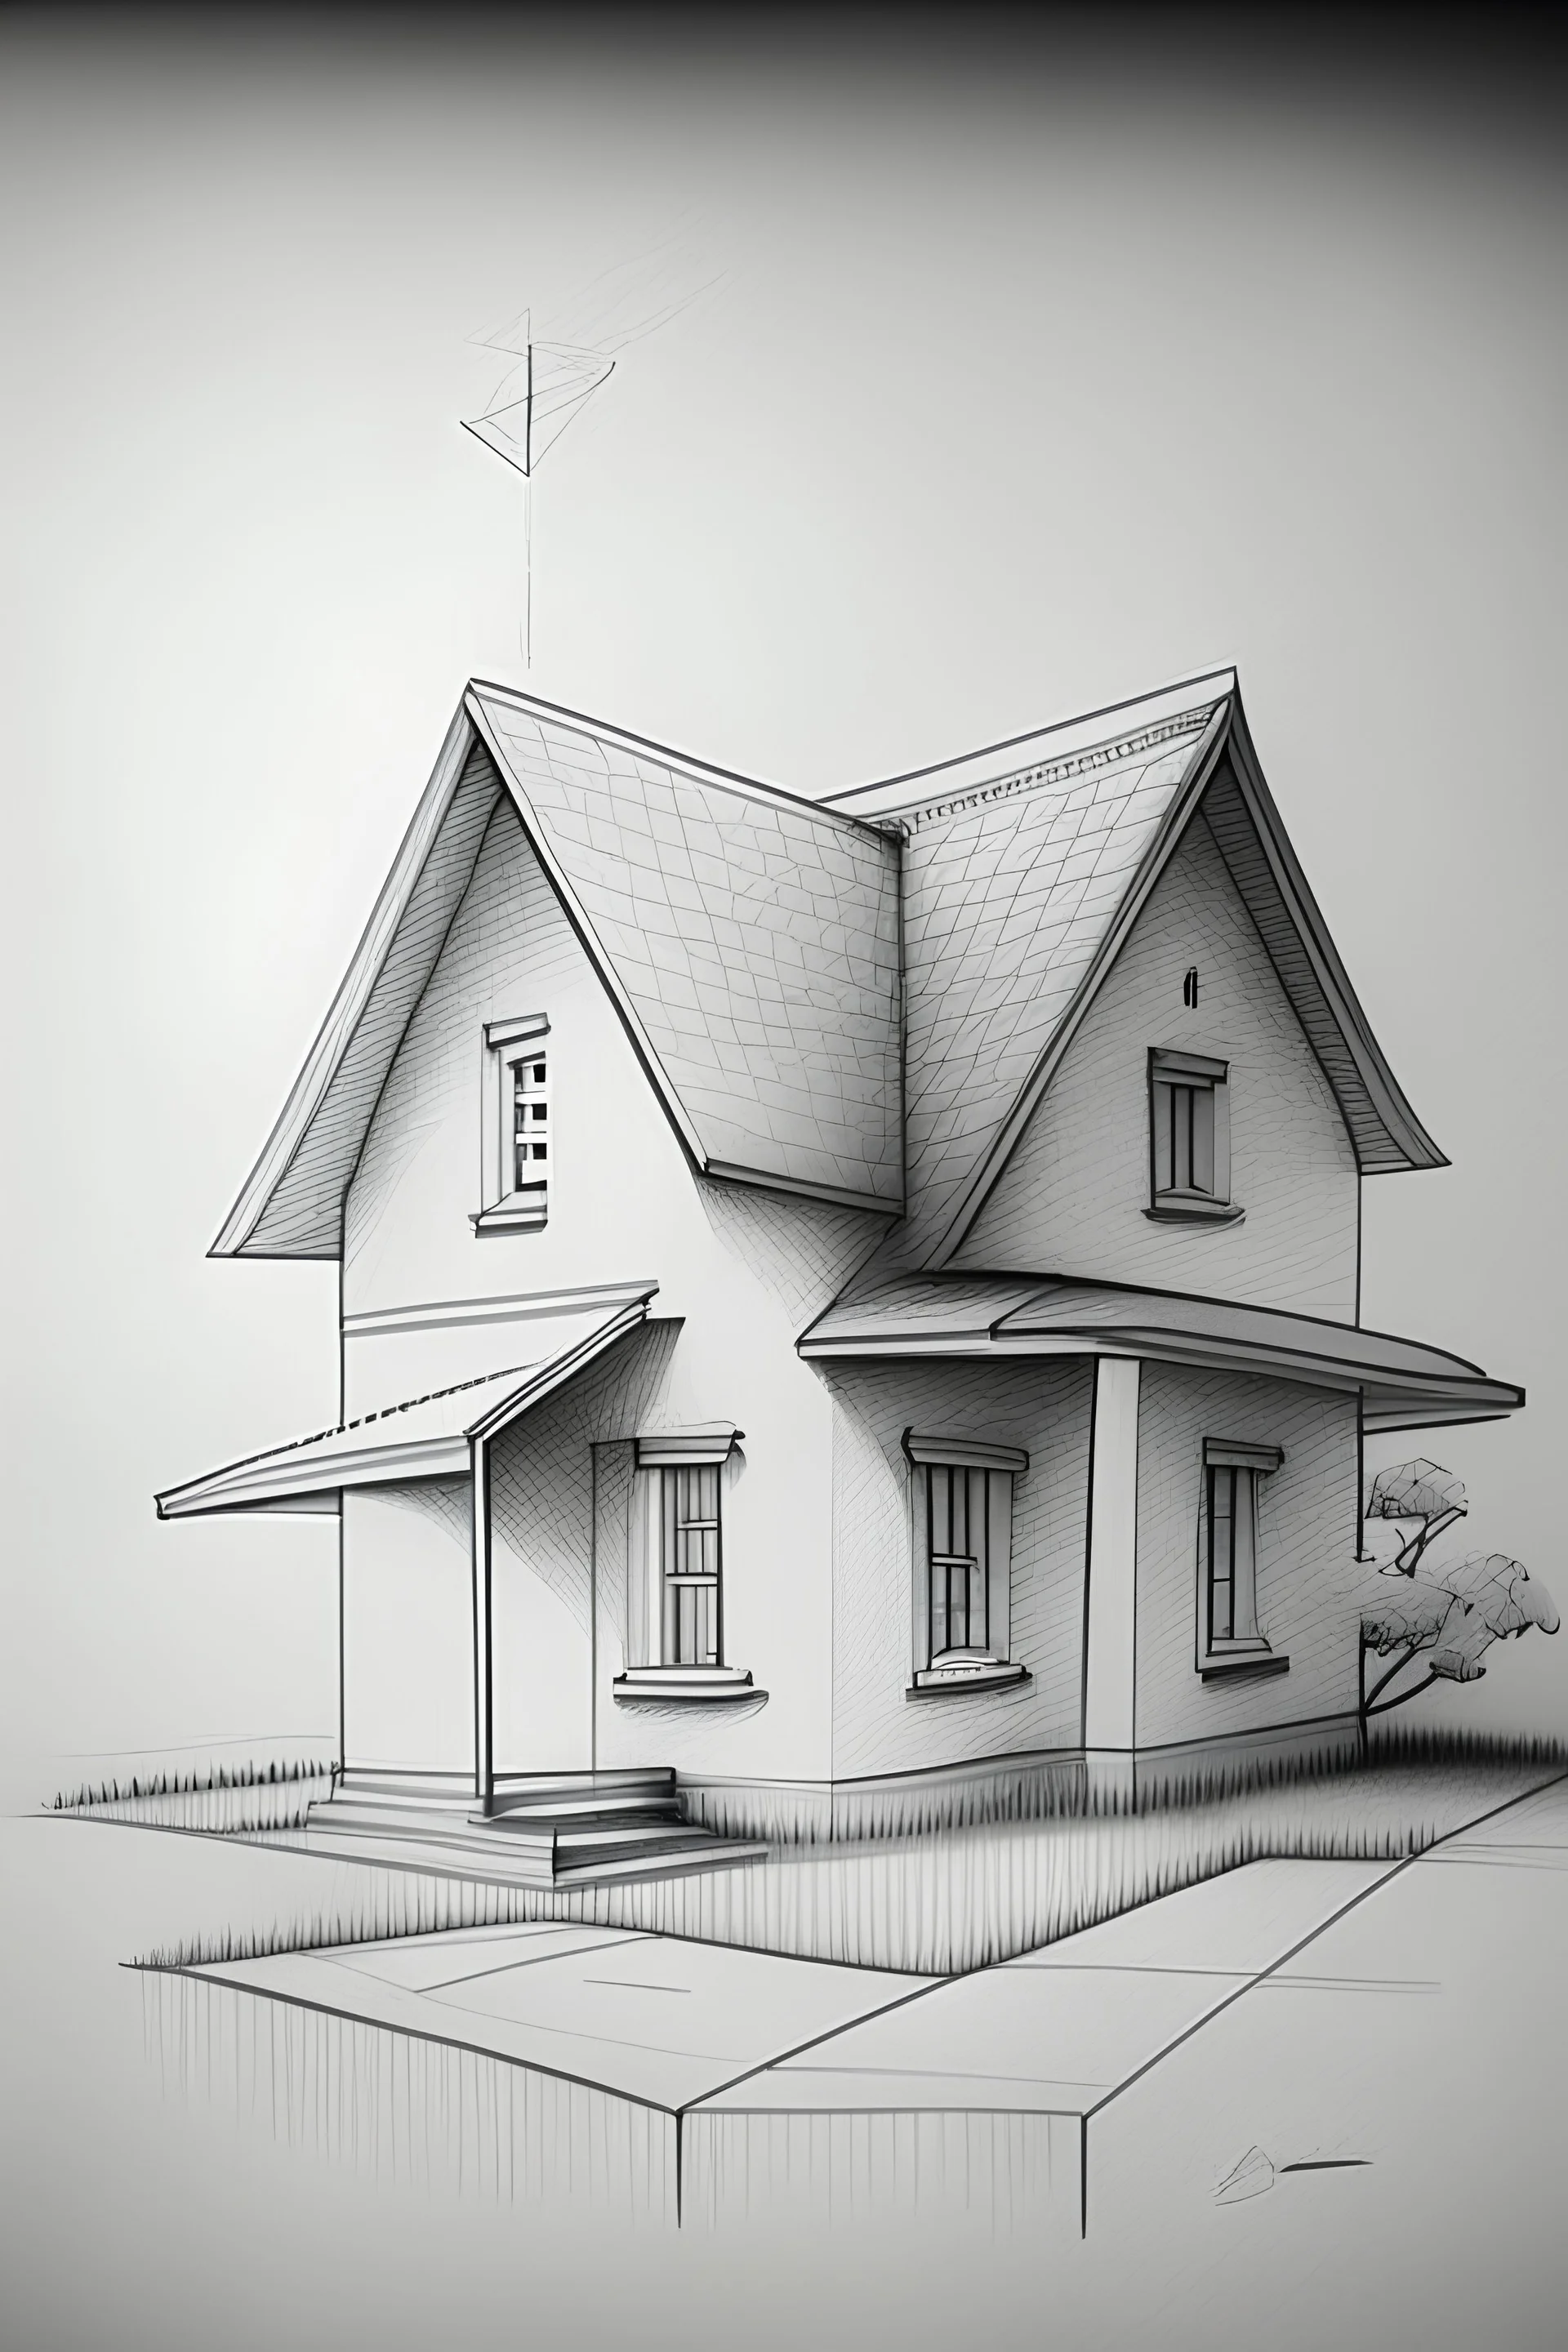 How to Draw a House - Easy Drawing Art